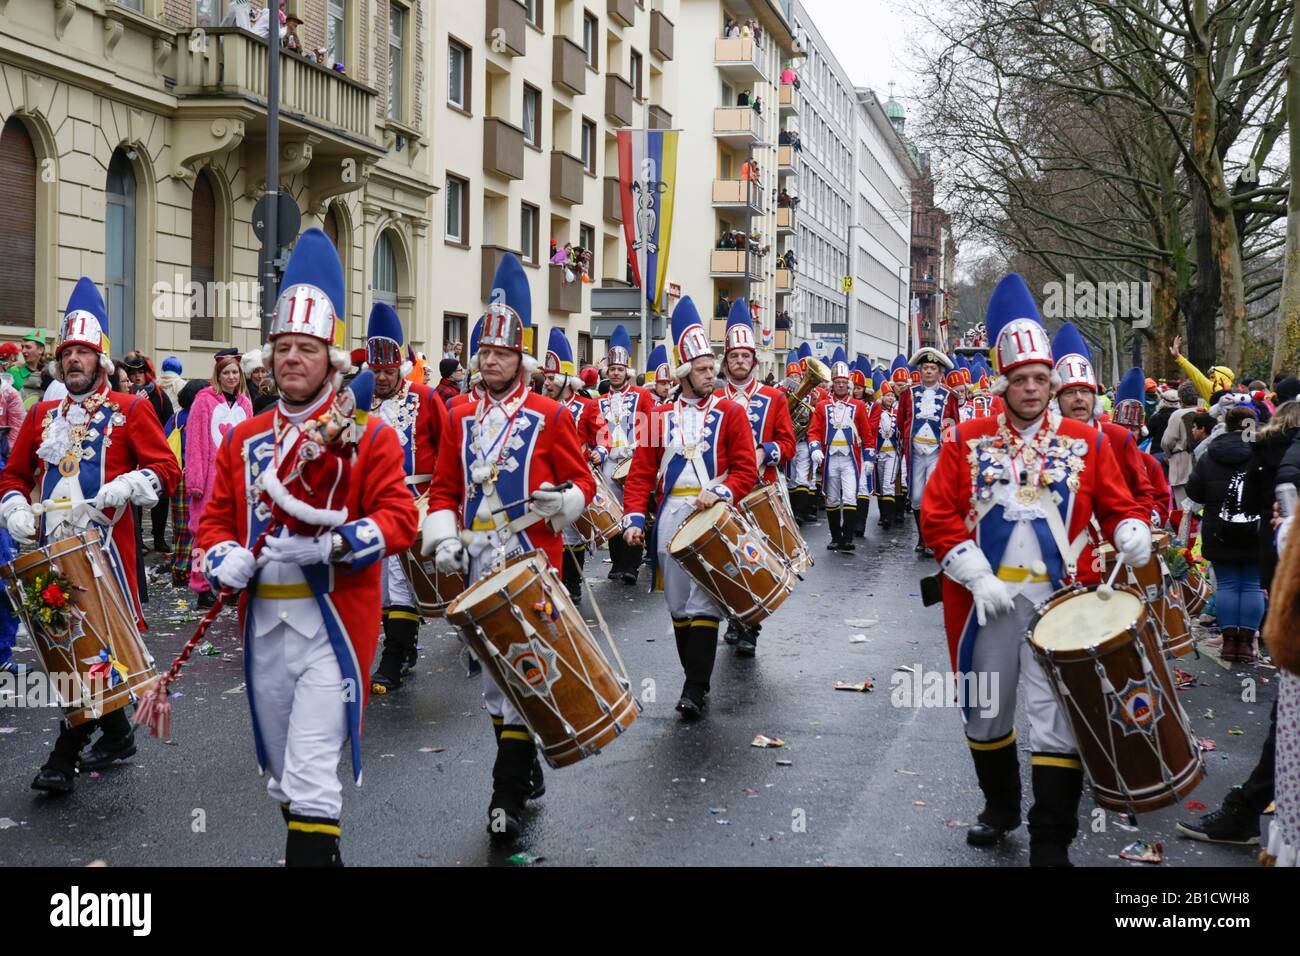 Mainz, Germany. 24th February 2020. Members of the marching band of the Mainzer Prinzengarde take part in the Mainz Rose Monday parade. Around half a million people lined the streets of Mainz for the traditional Rose Monday Carnival Parade. The 9 km long parade with over 9,000 participants is one of the three large Rose Monday Parades in Germany. Stock Photo